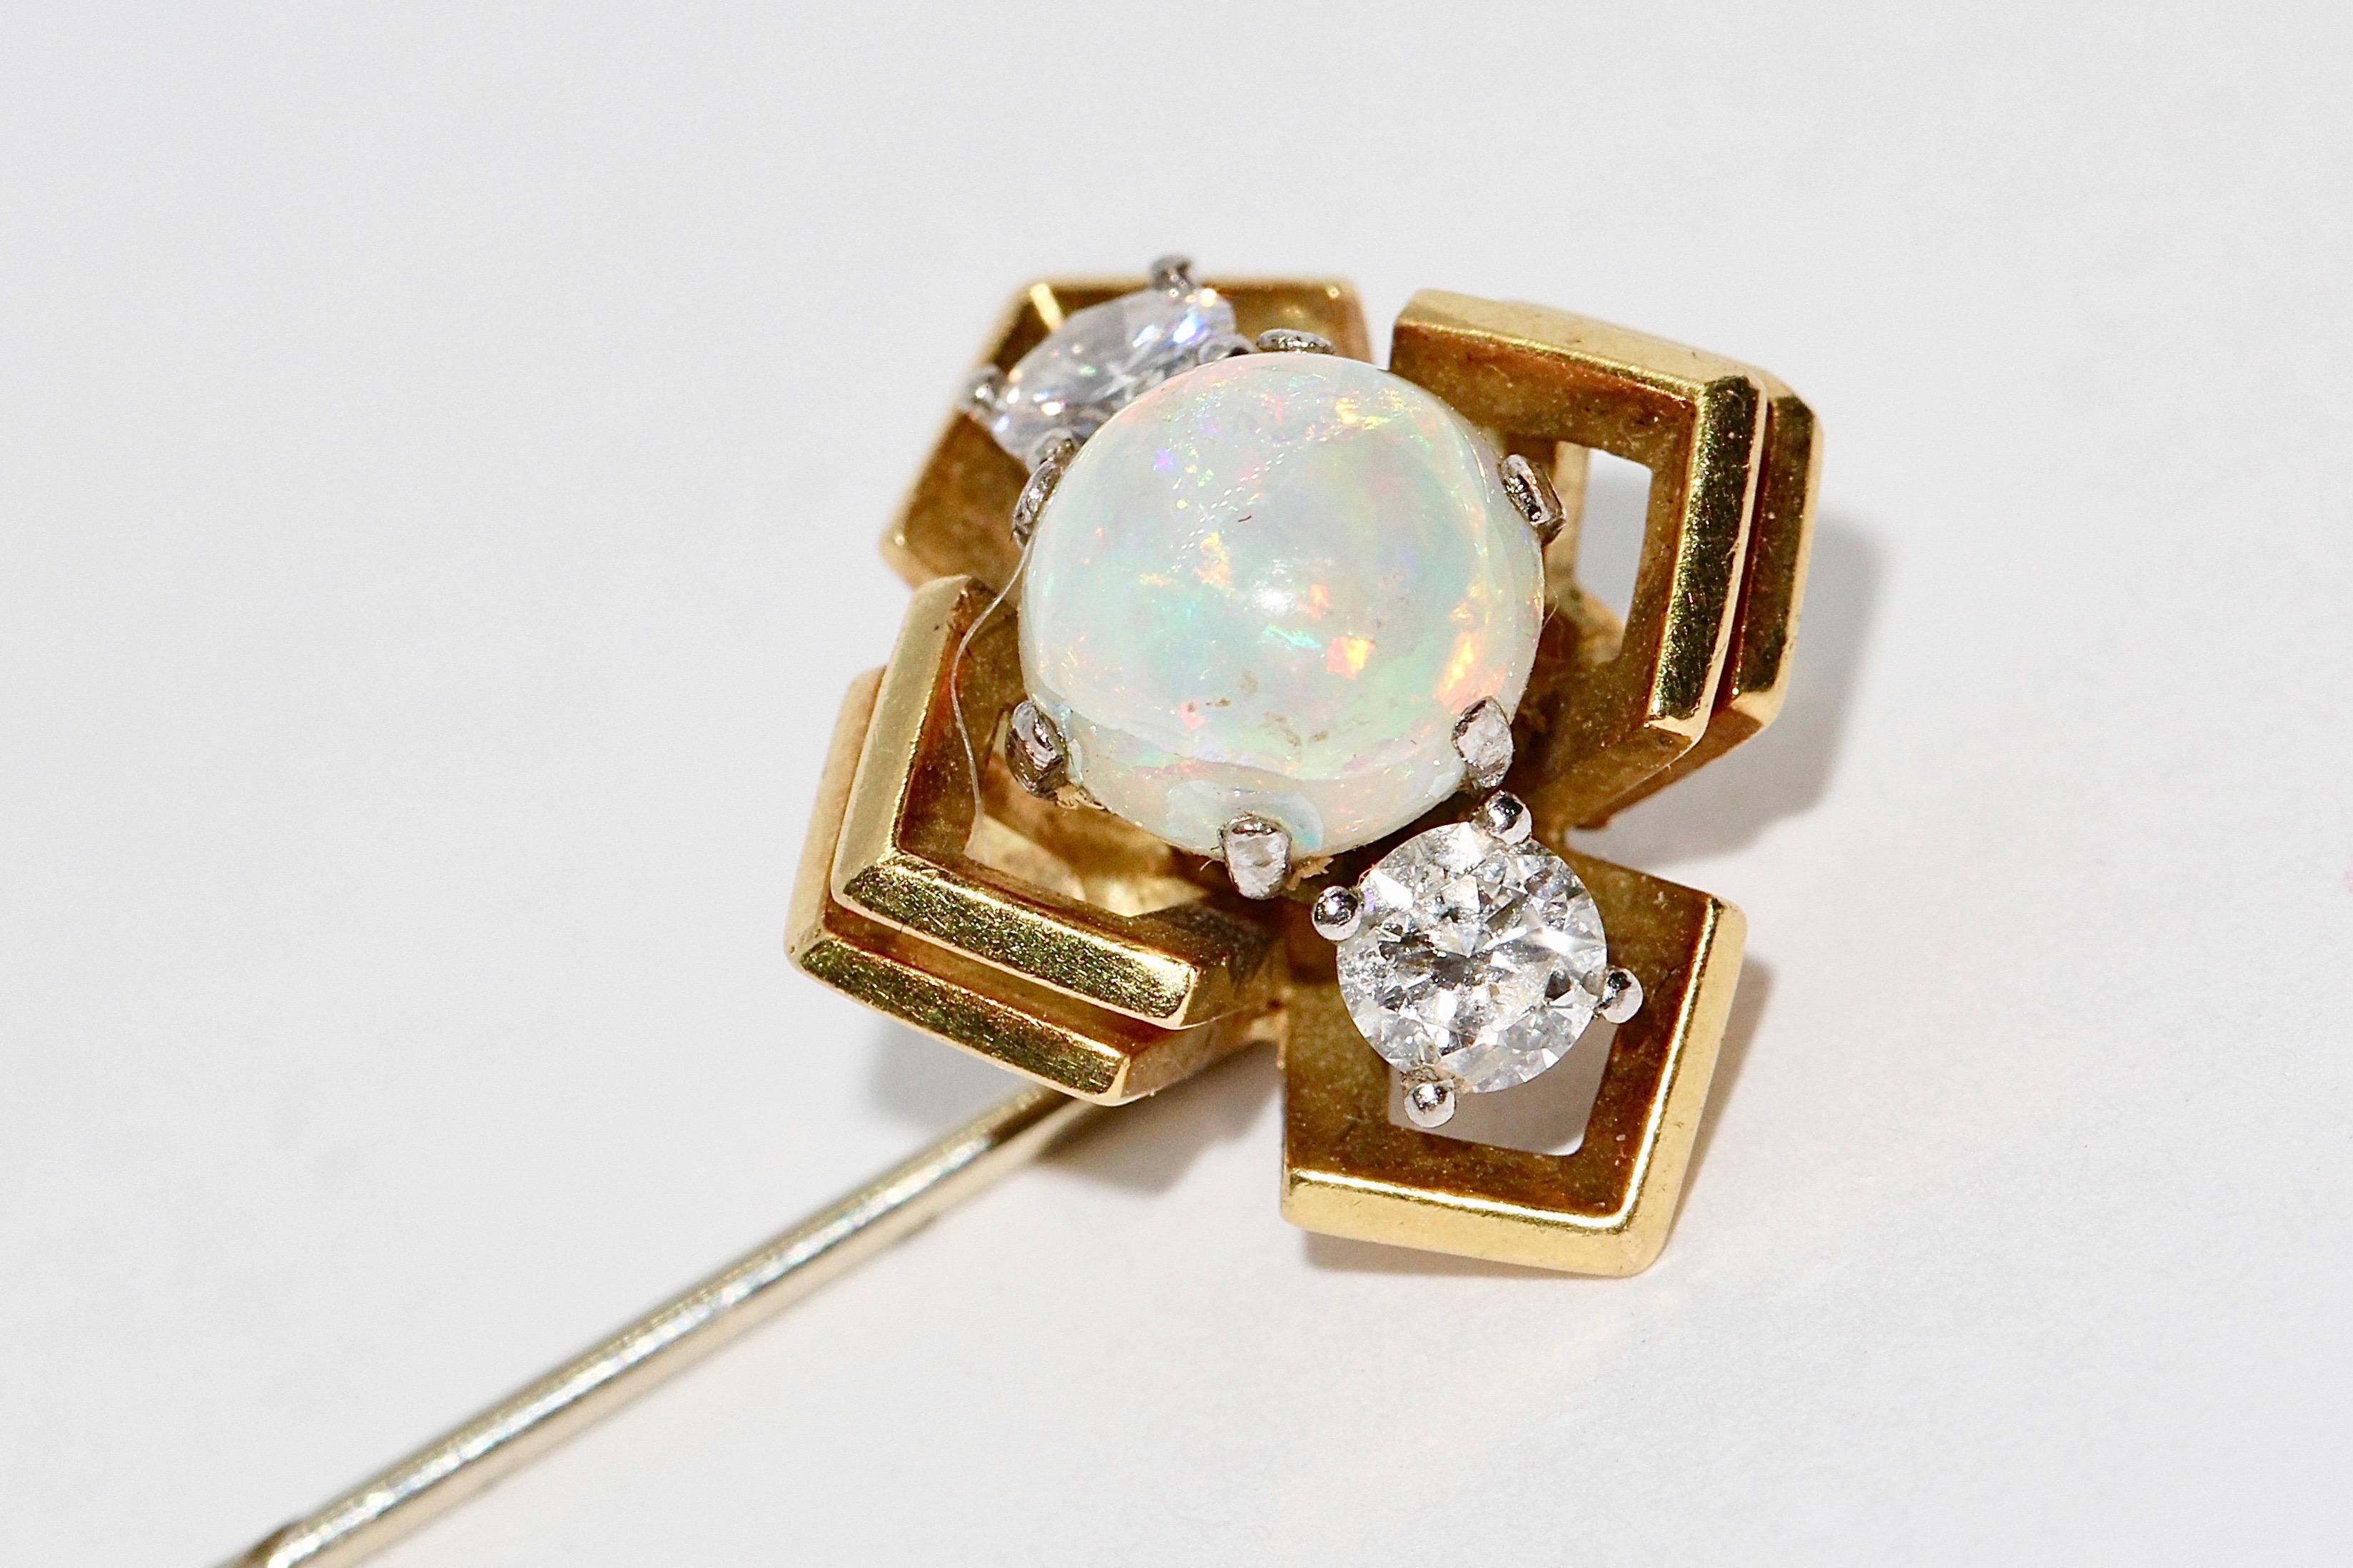 Pretty Gold Pin with Opal and two Diamond Solitaires.

Diamonds each about 0.16 carat, very good quality!